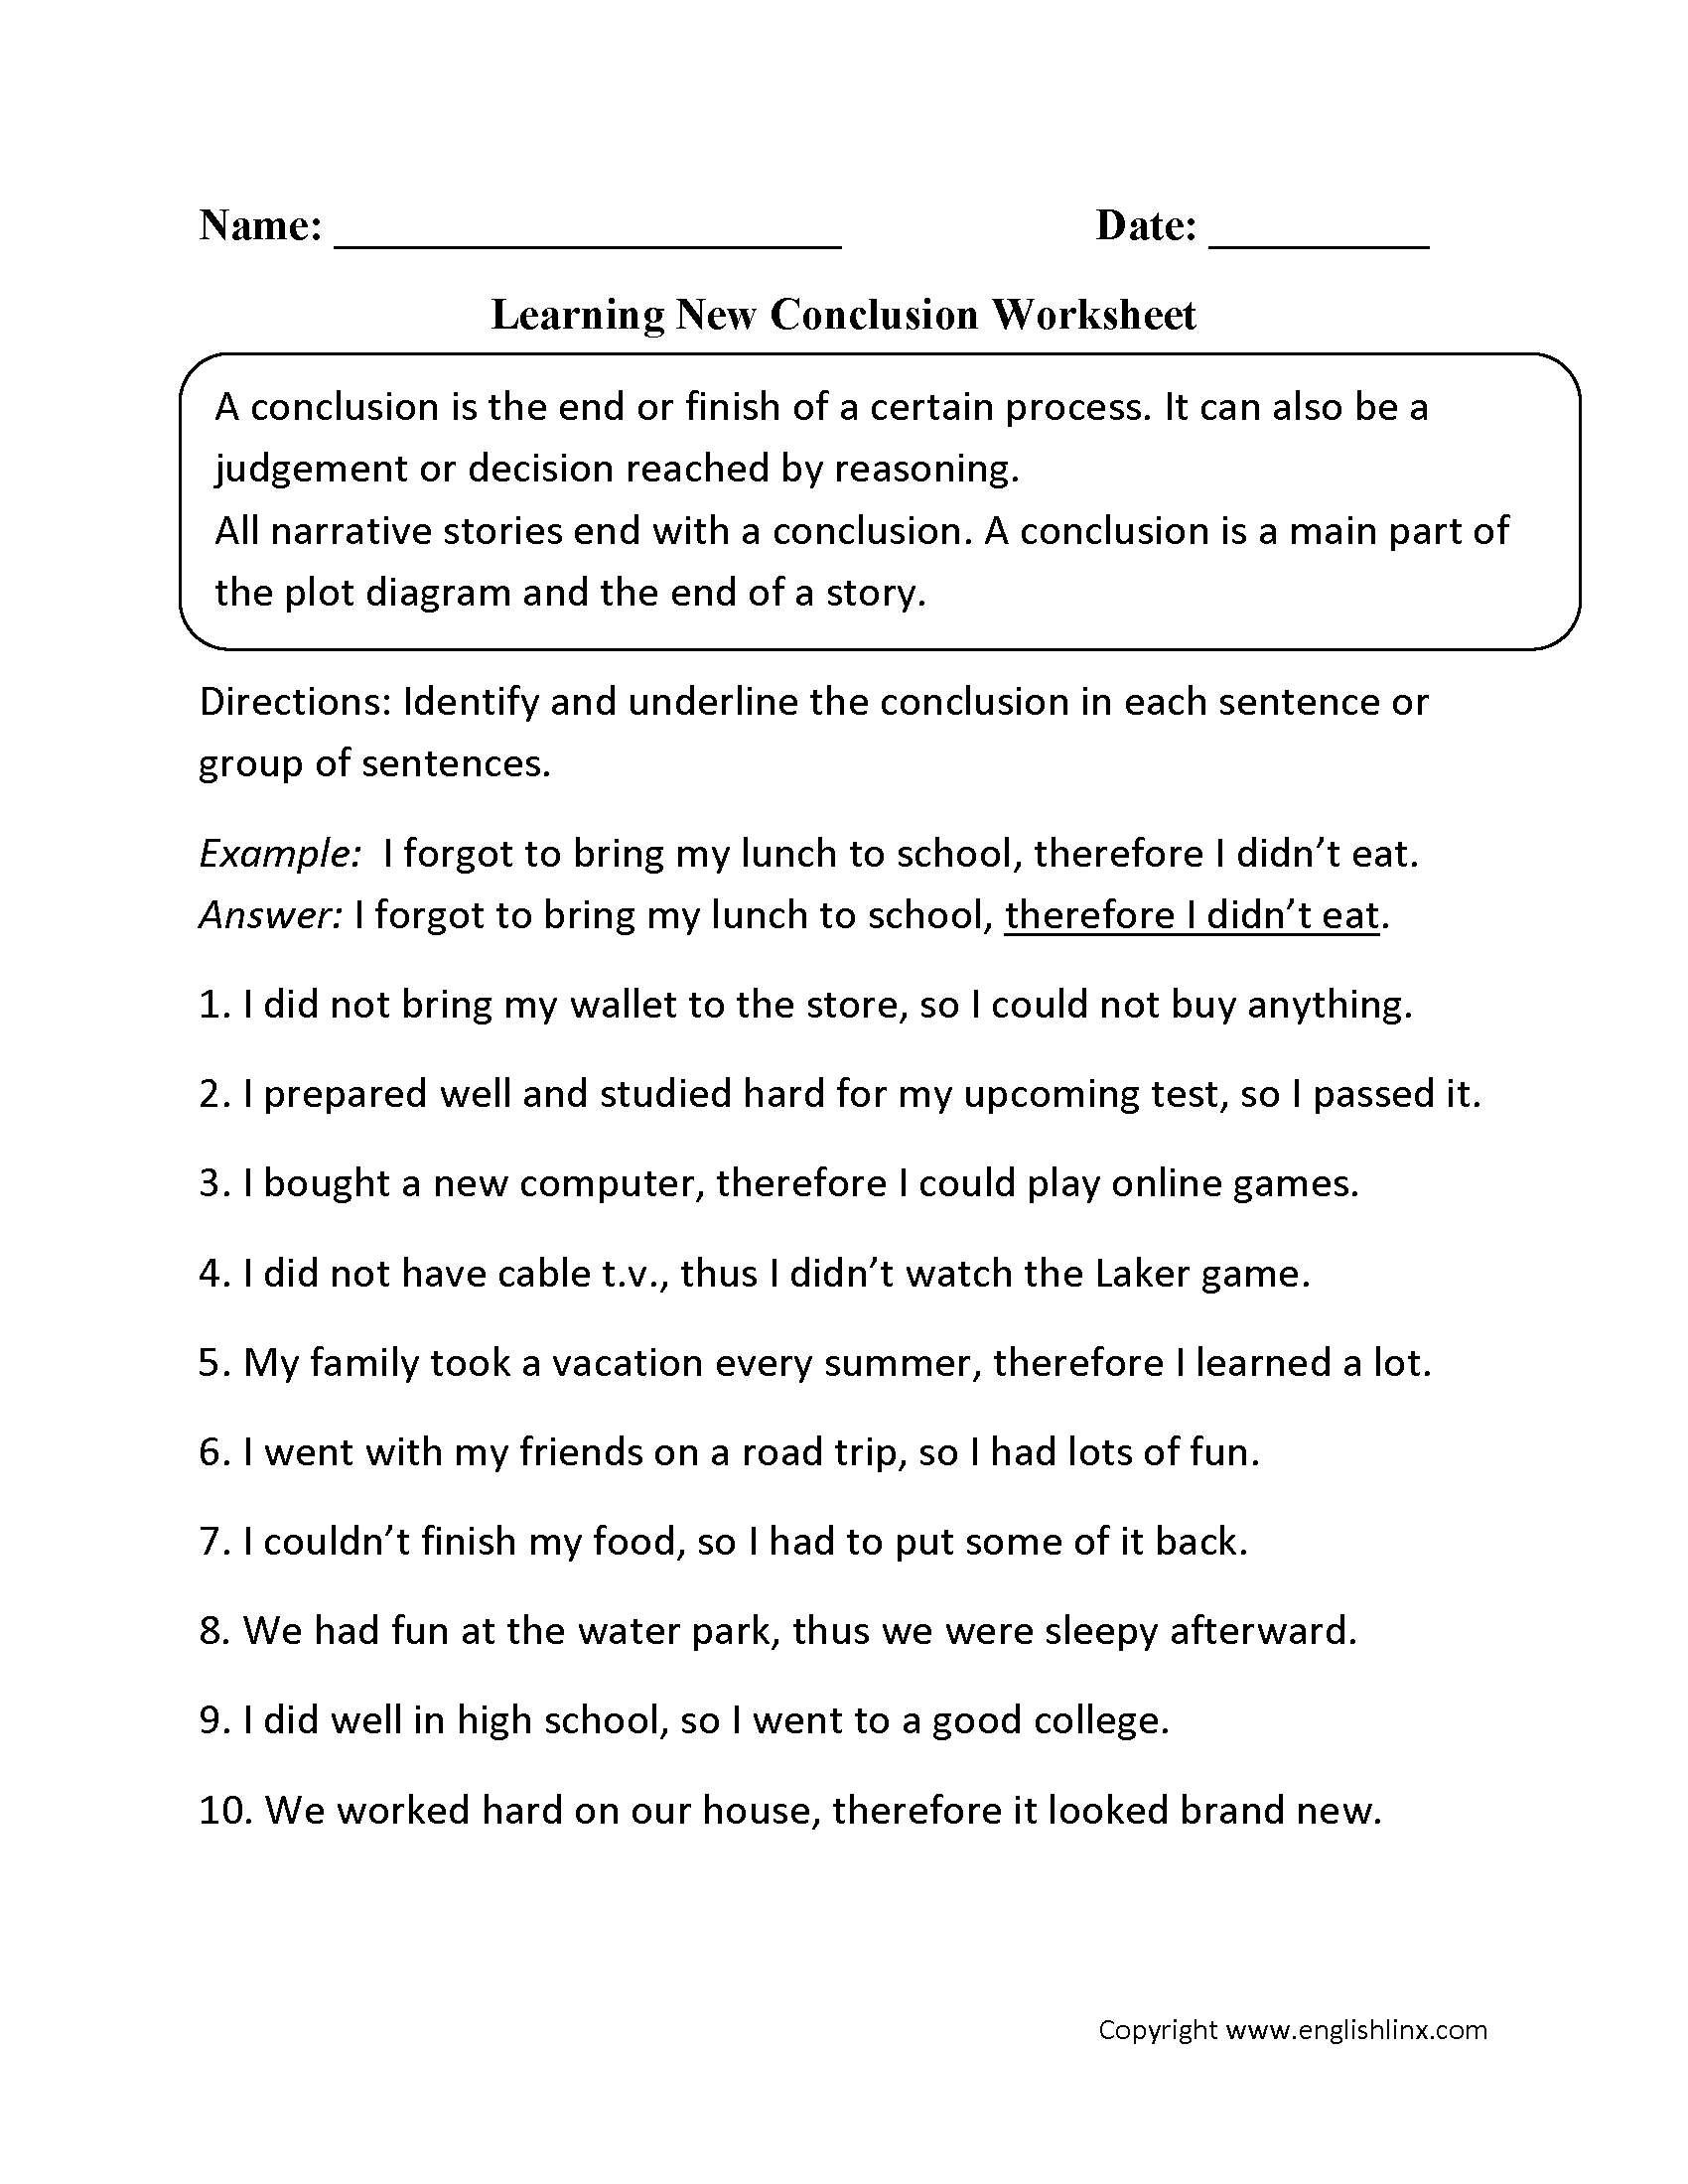 Learning New Conclusion<br>Worksheet